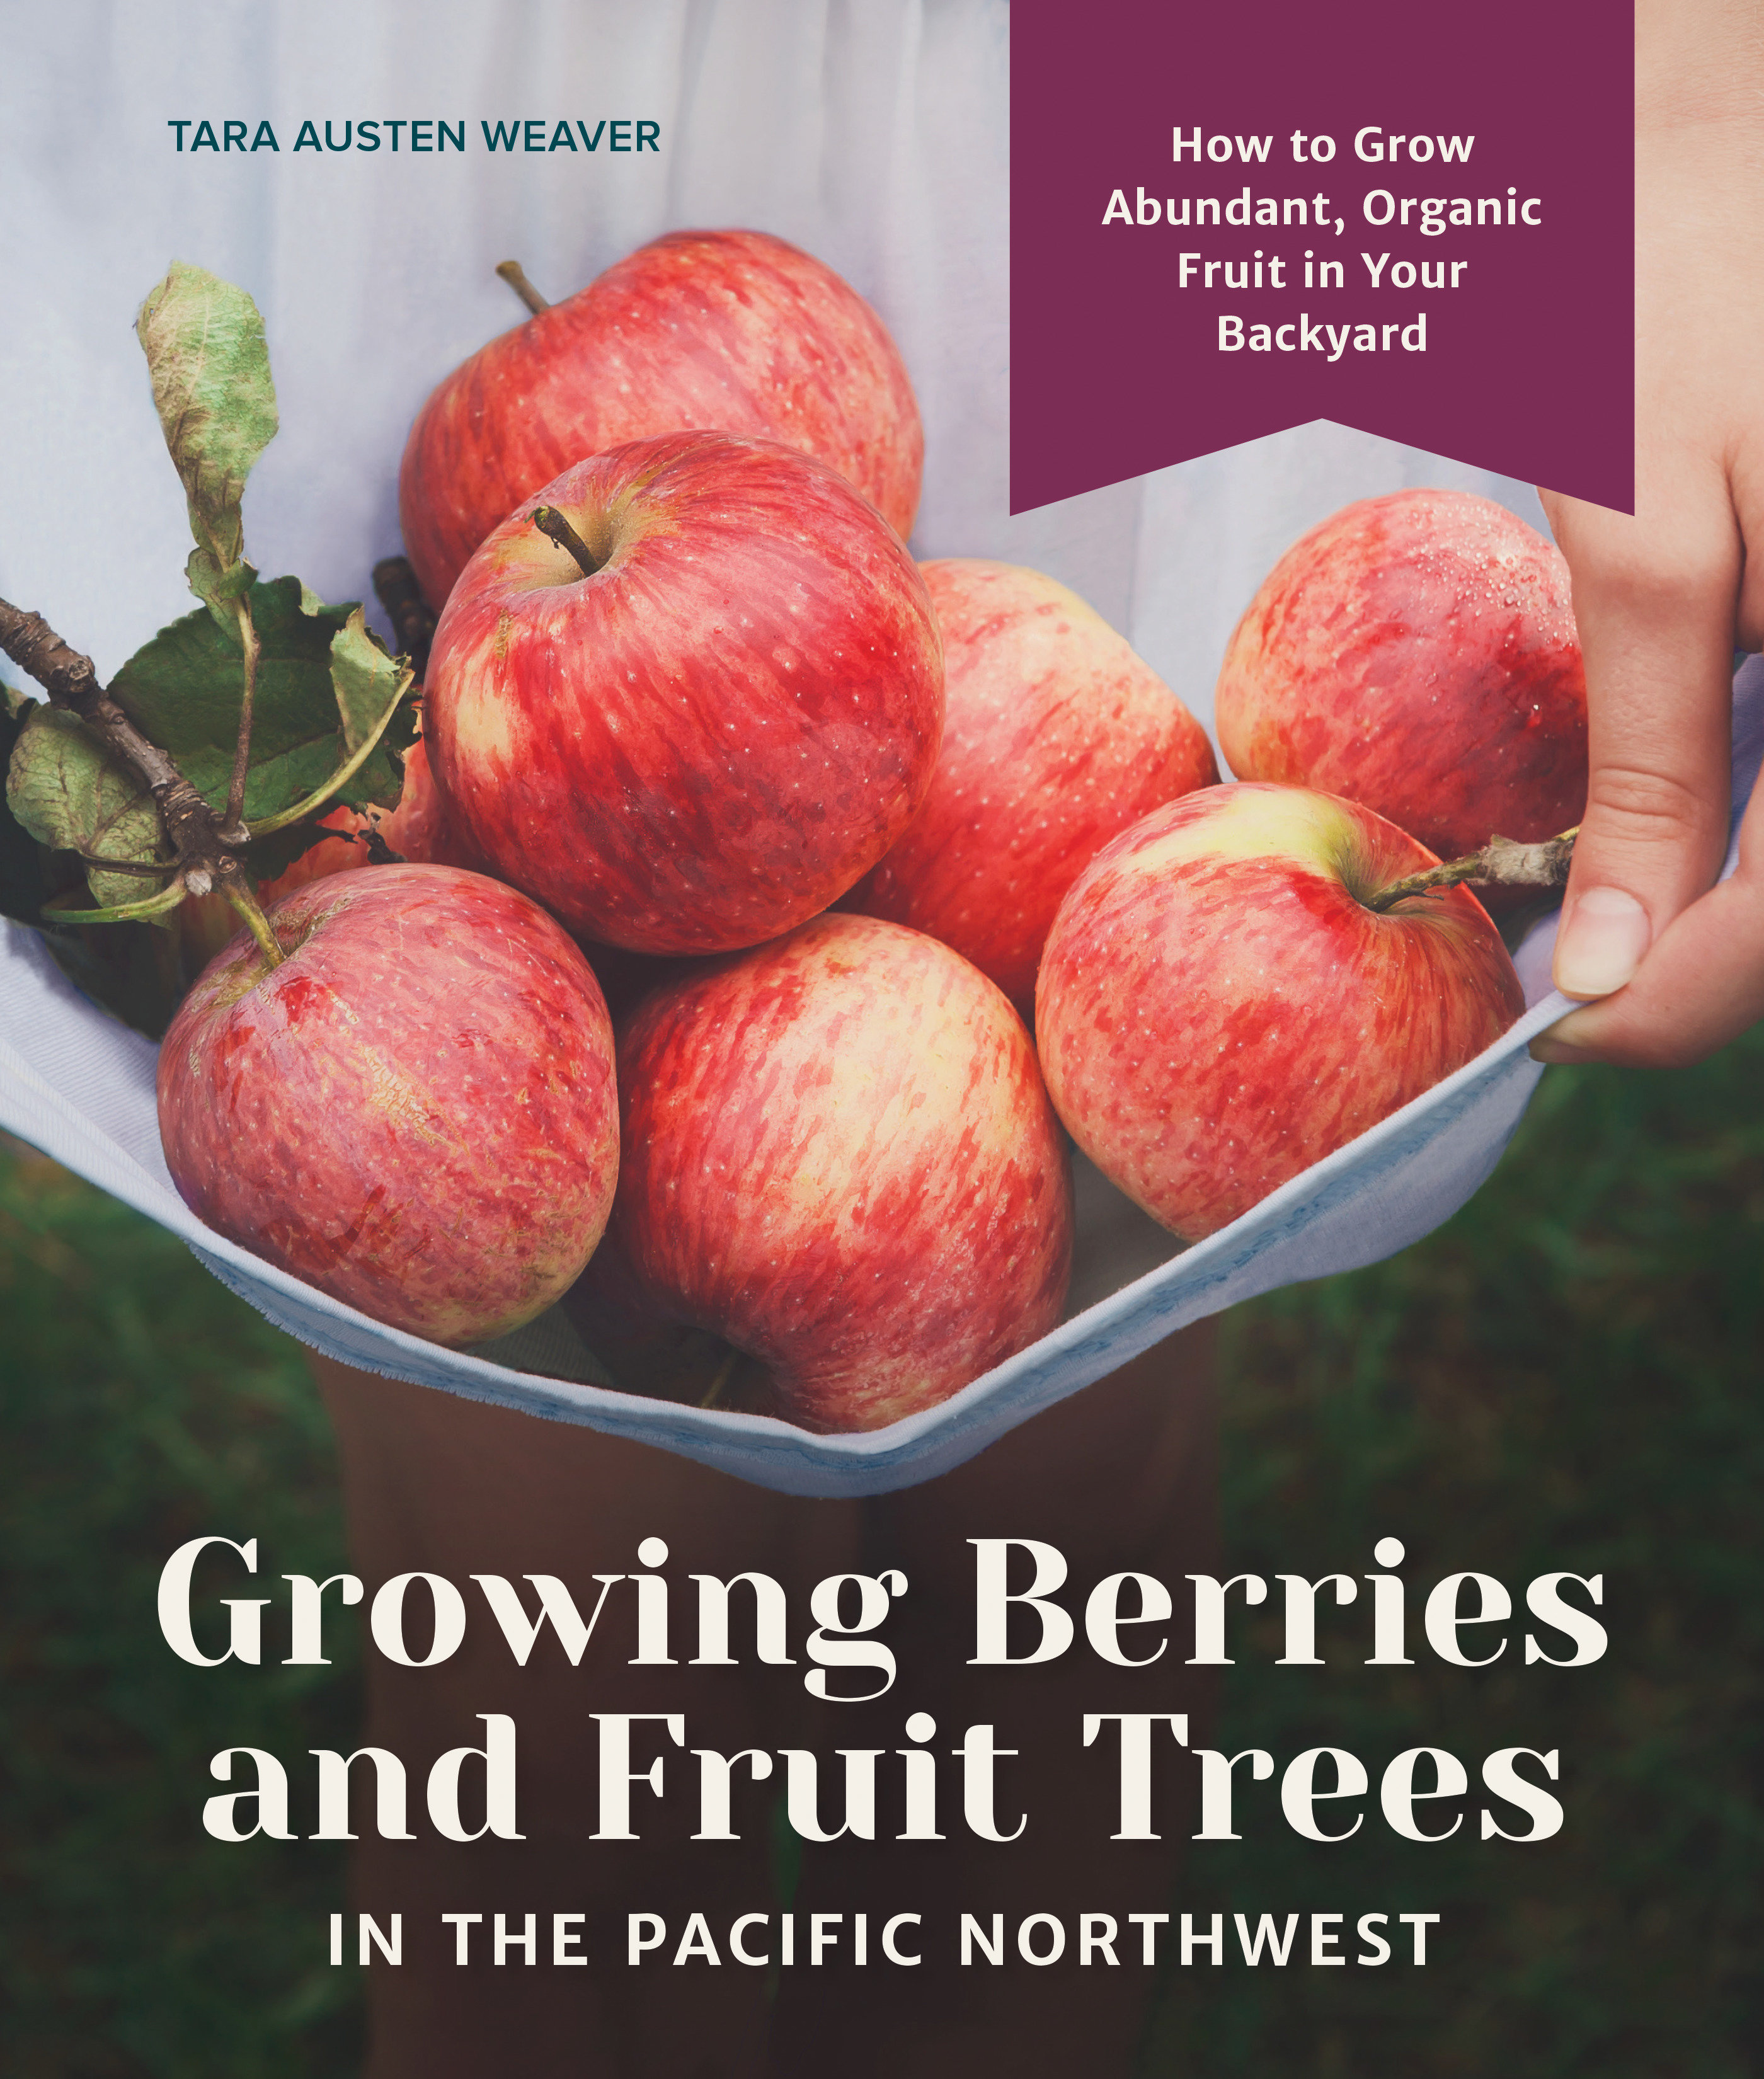 Growing Berries And Fruit Trees In The Pacific Northwest (Hardcover Book)